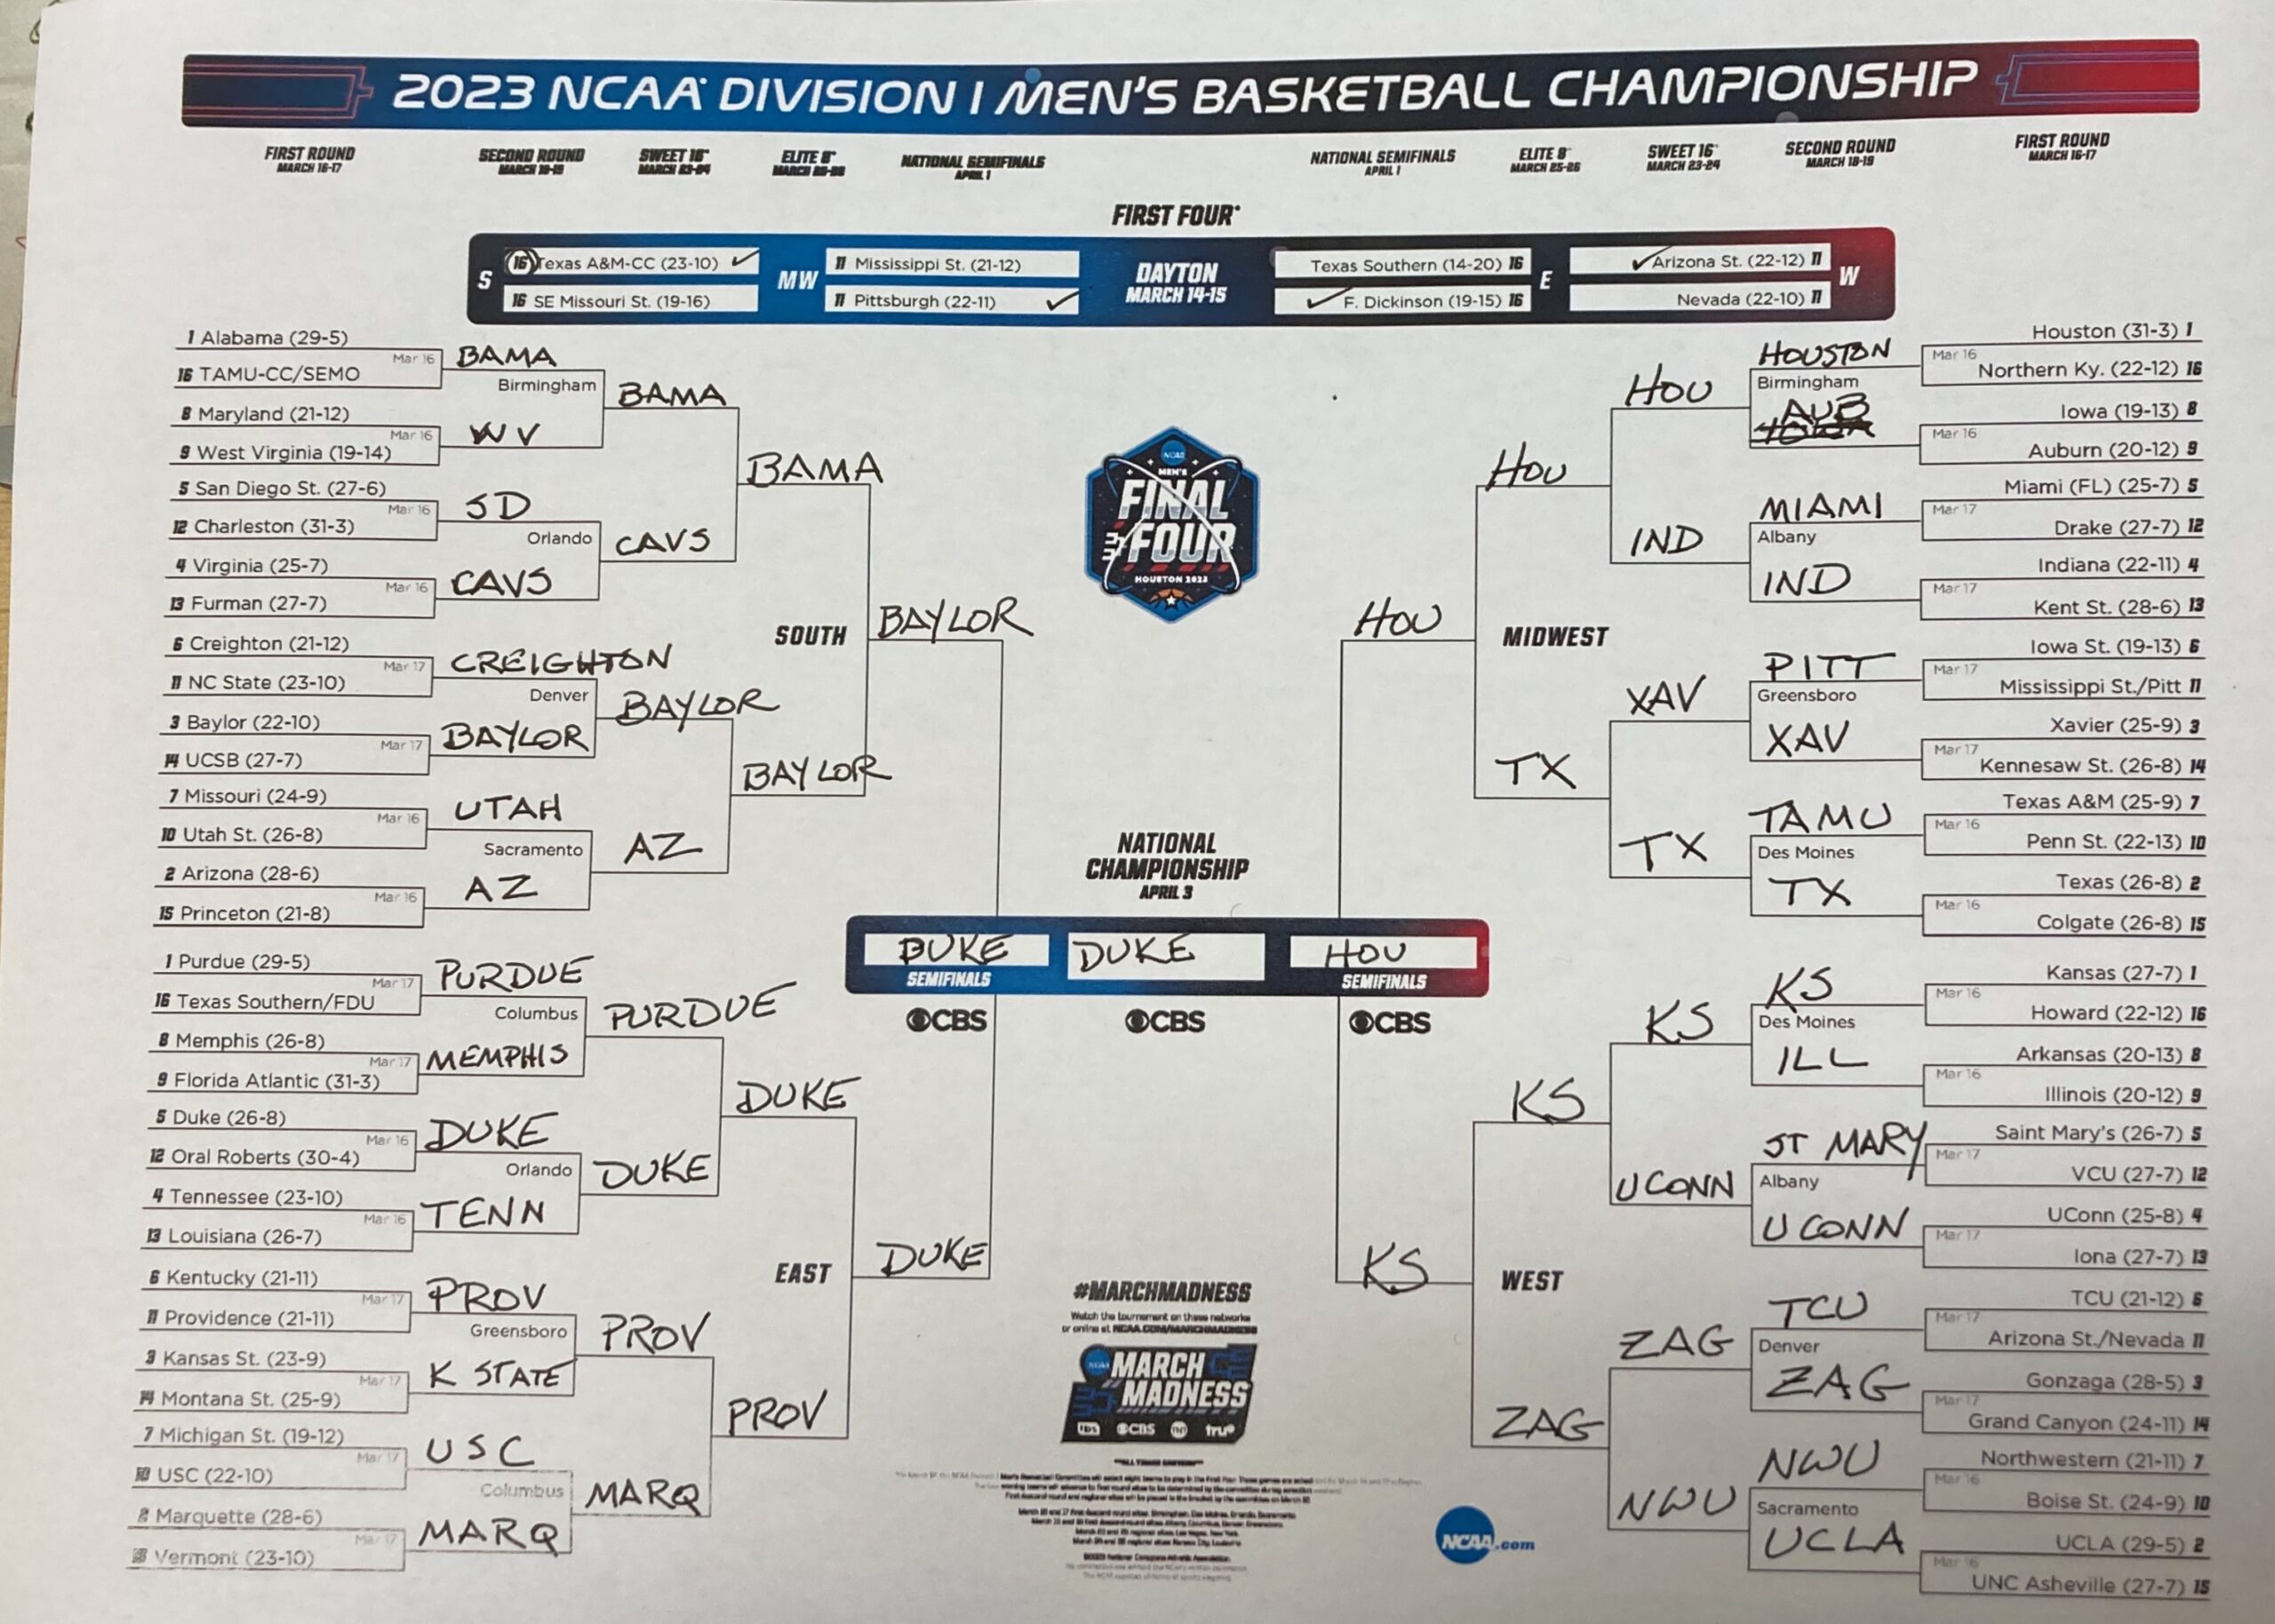 March Madness bracket - Duke goes all the way?